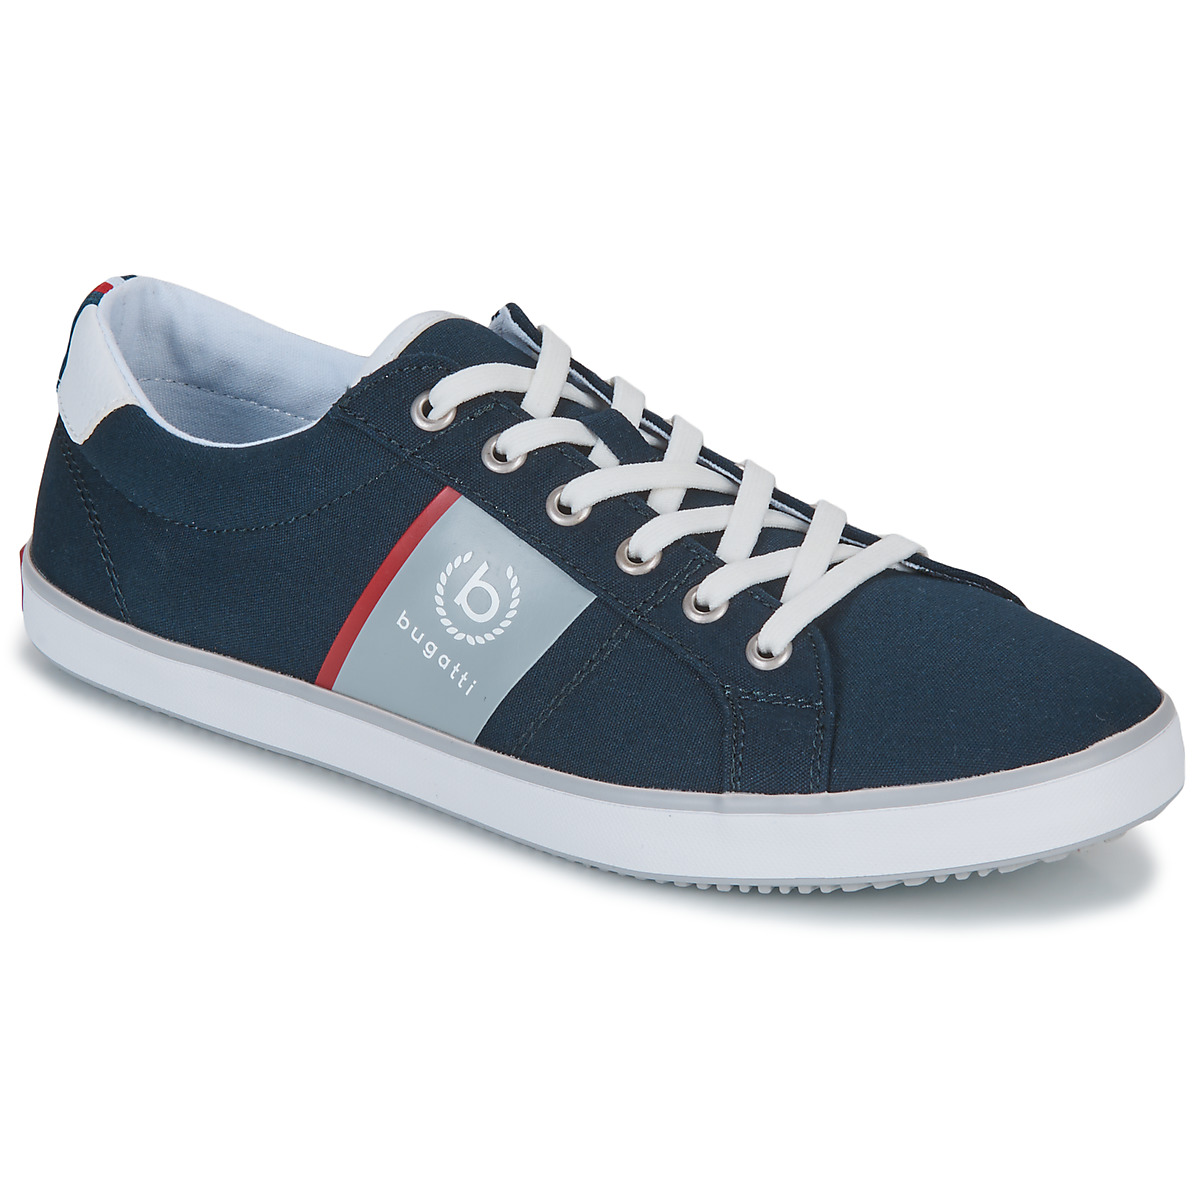 Bugatti ALBERT Marine - Shoes delivery Free Men Spartoo ! top trainers Low - NET 